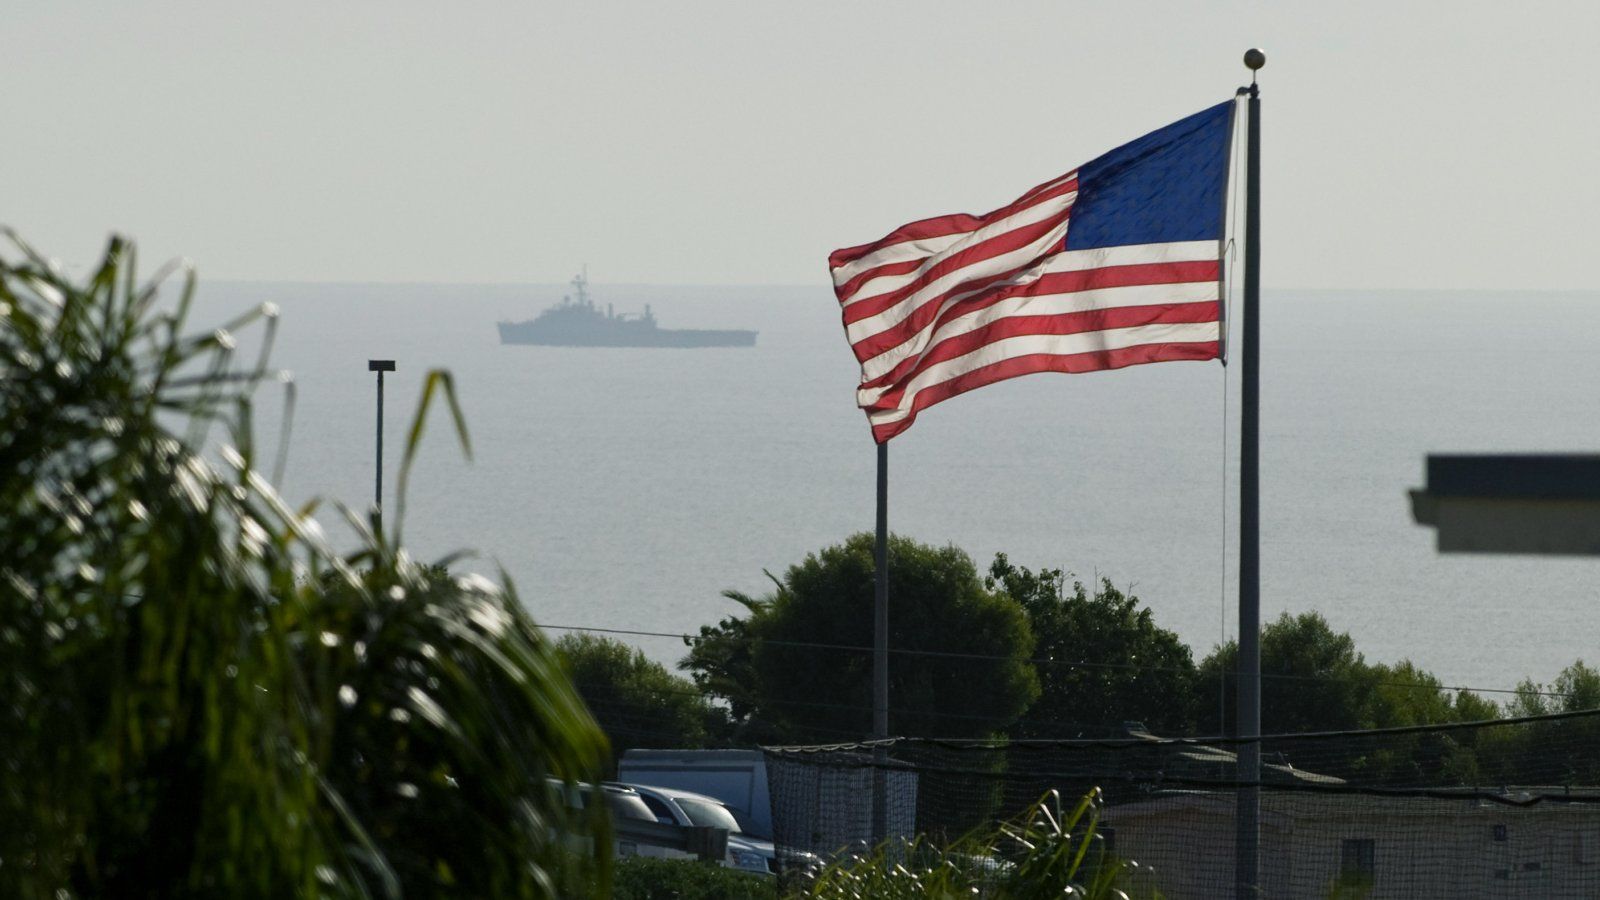 PLNU proudly flies the flag between on campus, while a navy ship maneuvers just off the coast.